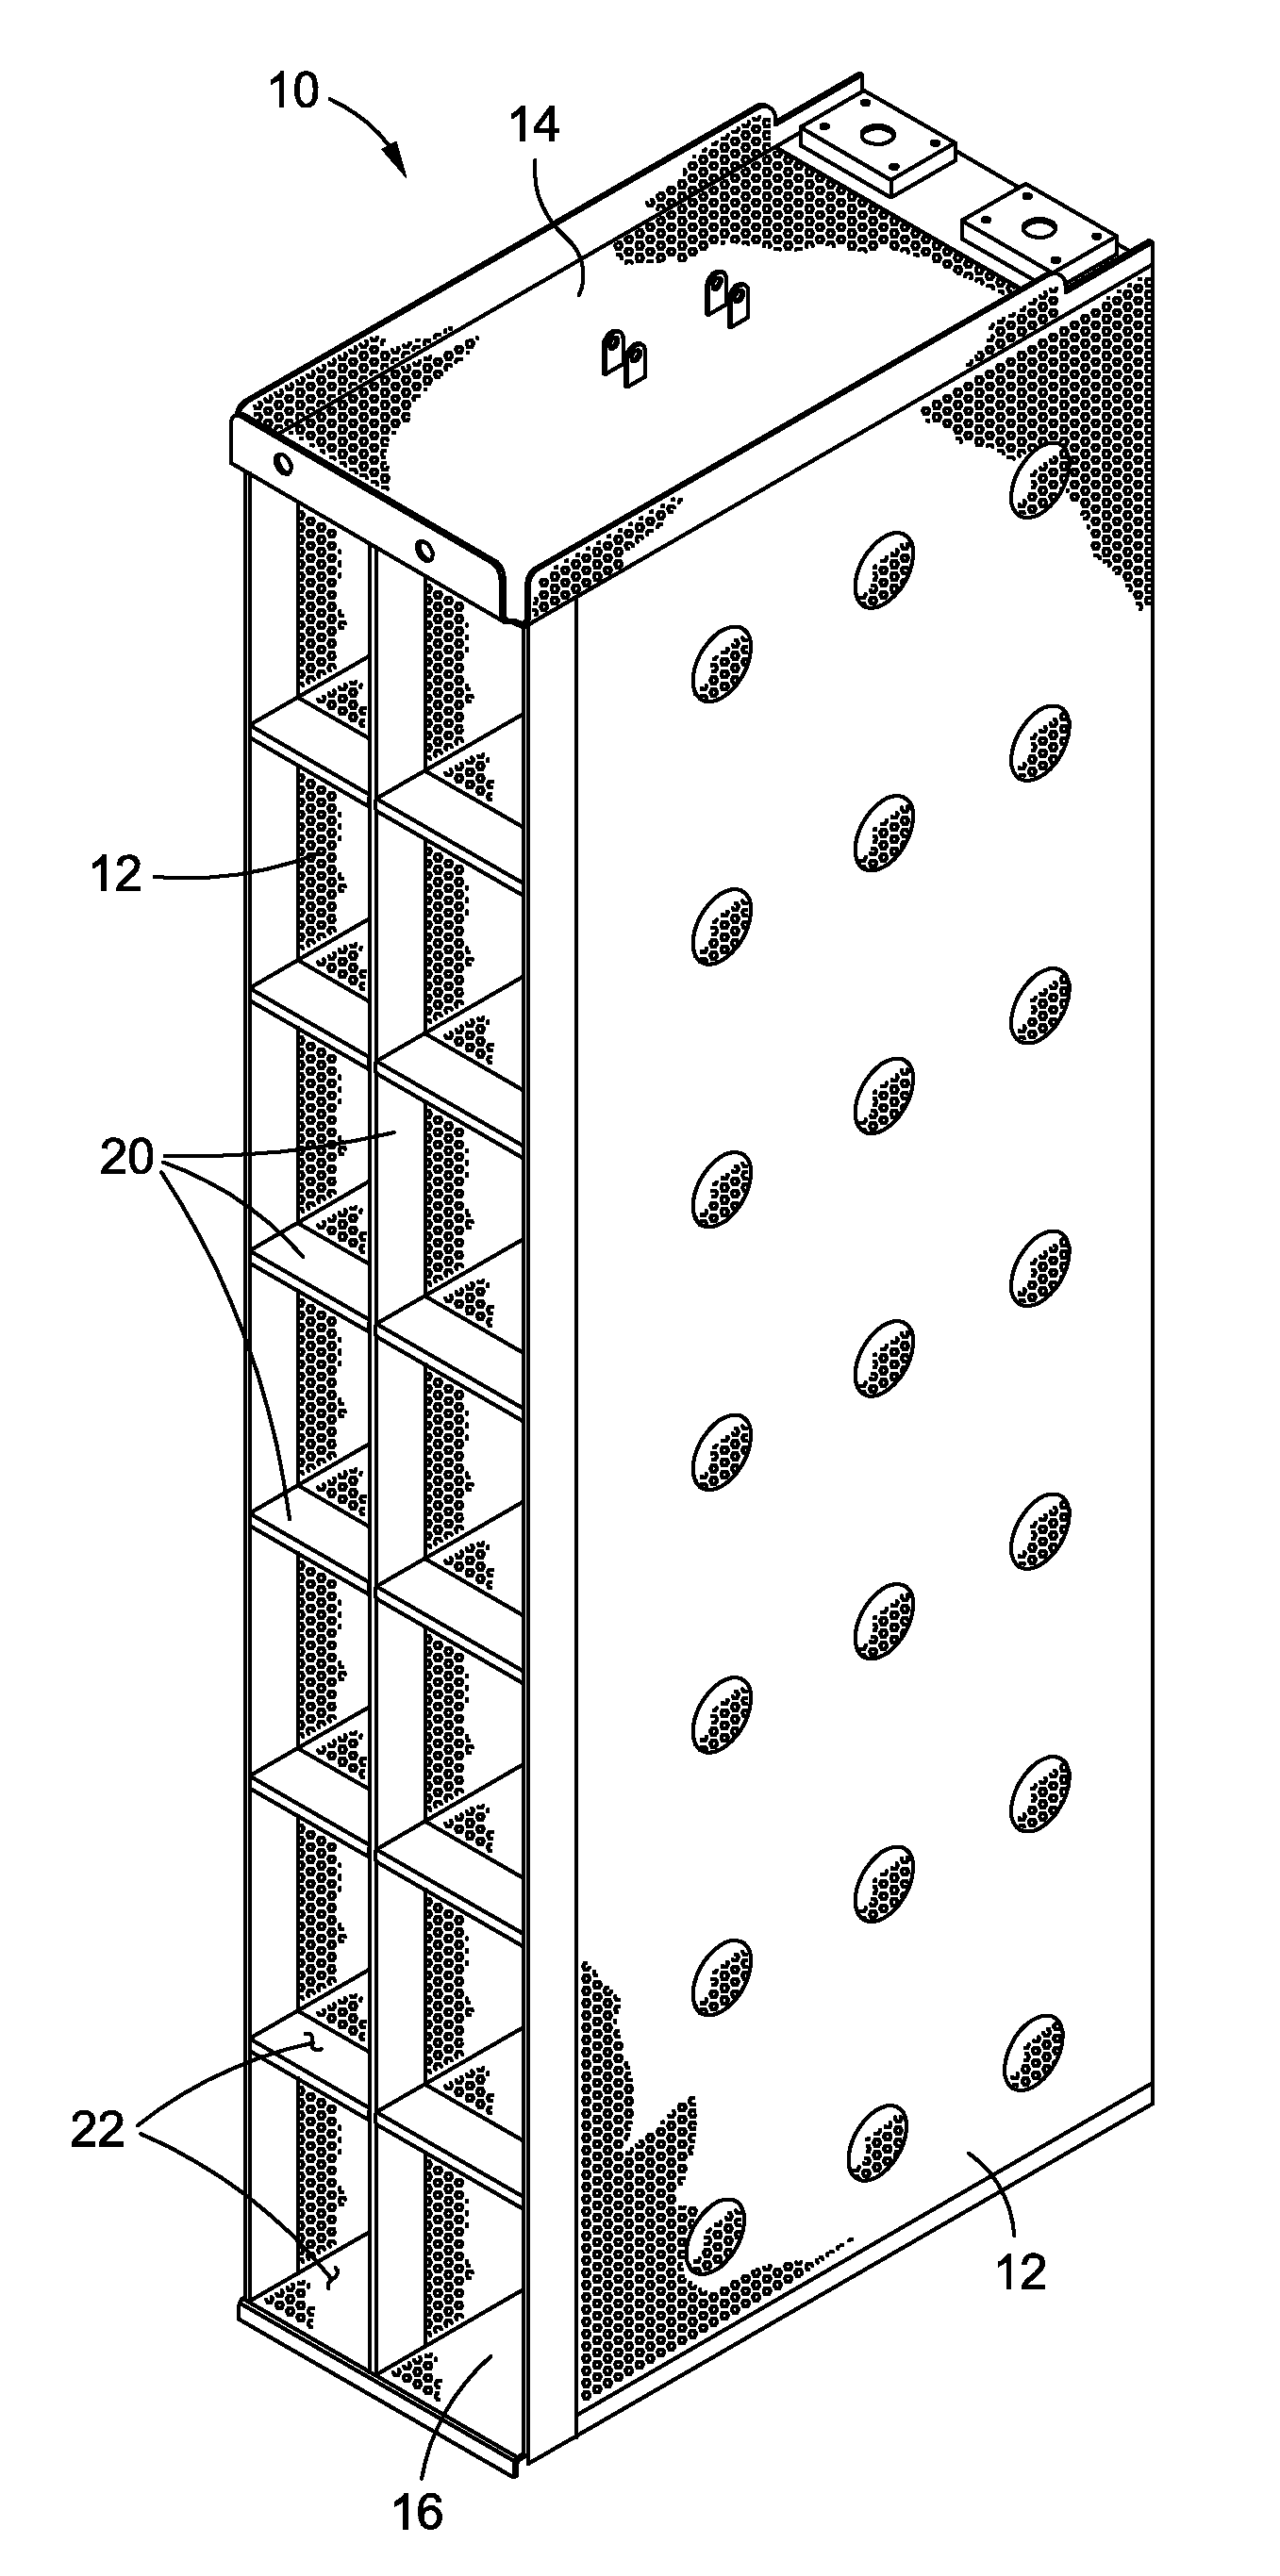 Enhanced nuclear sump strainer system